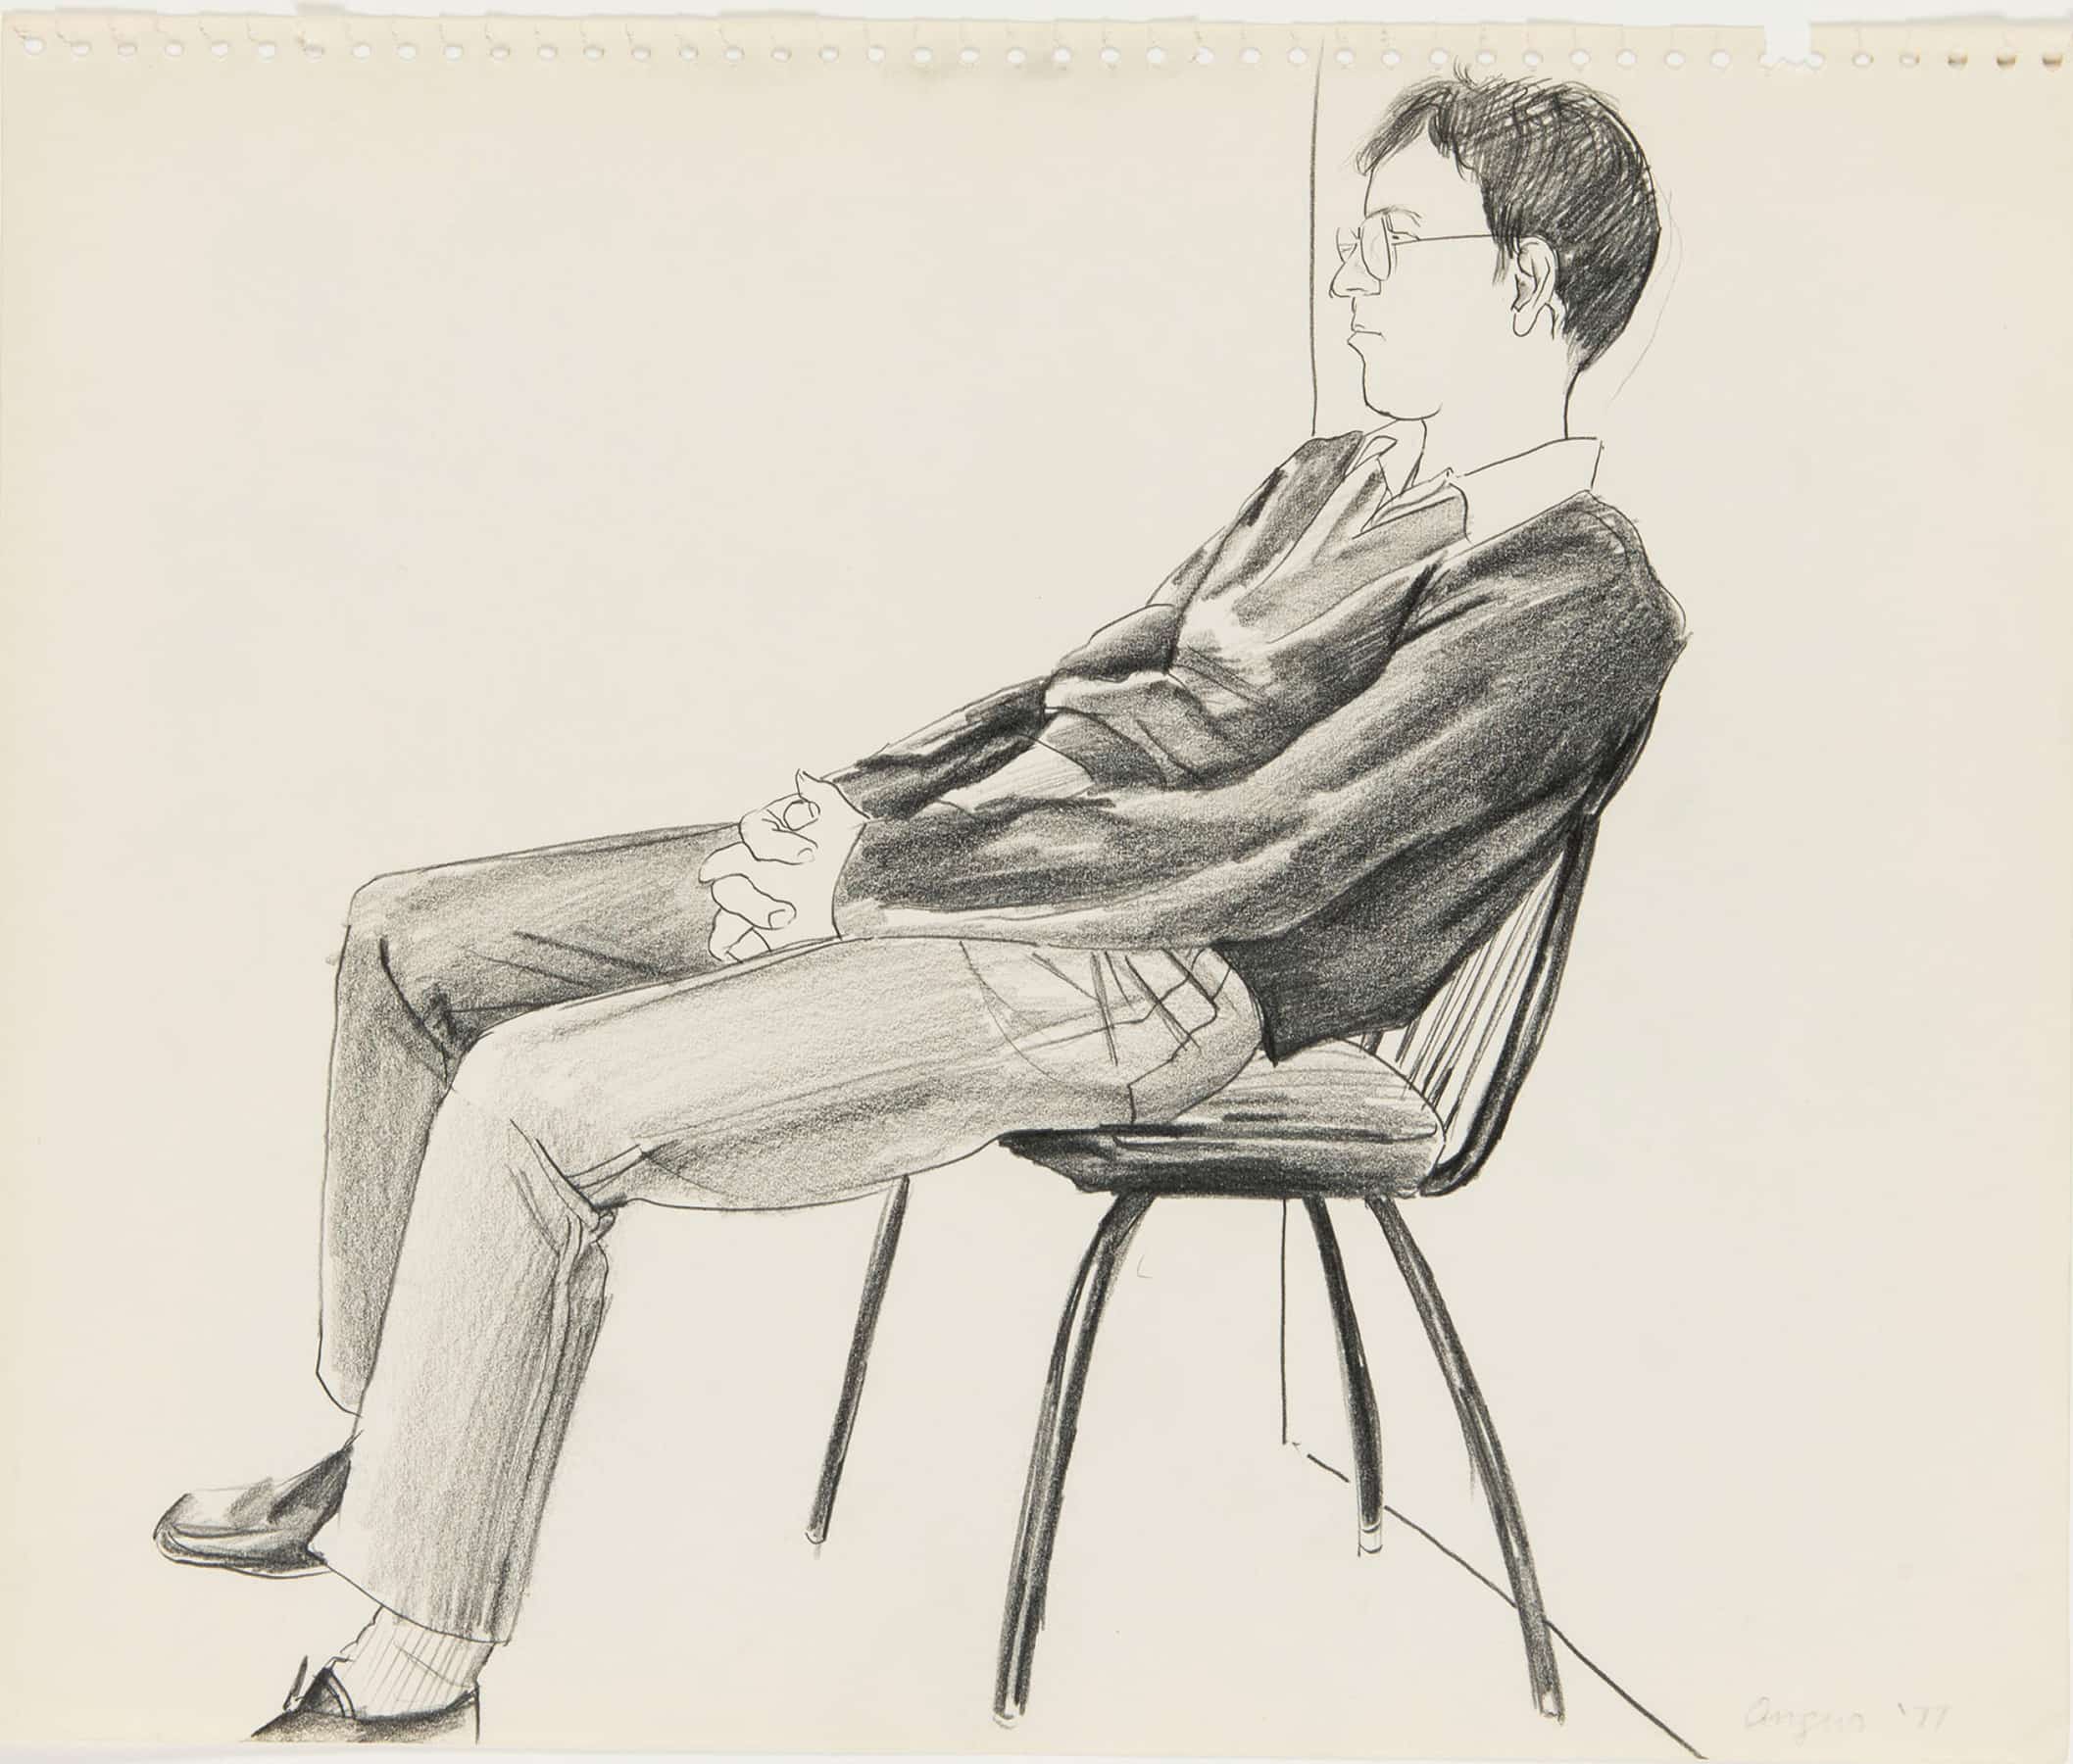 Patrick Angus | untitled, 1977 | pencil on paper | cm. 29.7 x 35.5 © Estate of Patrick Angus